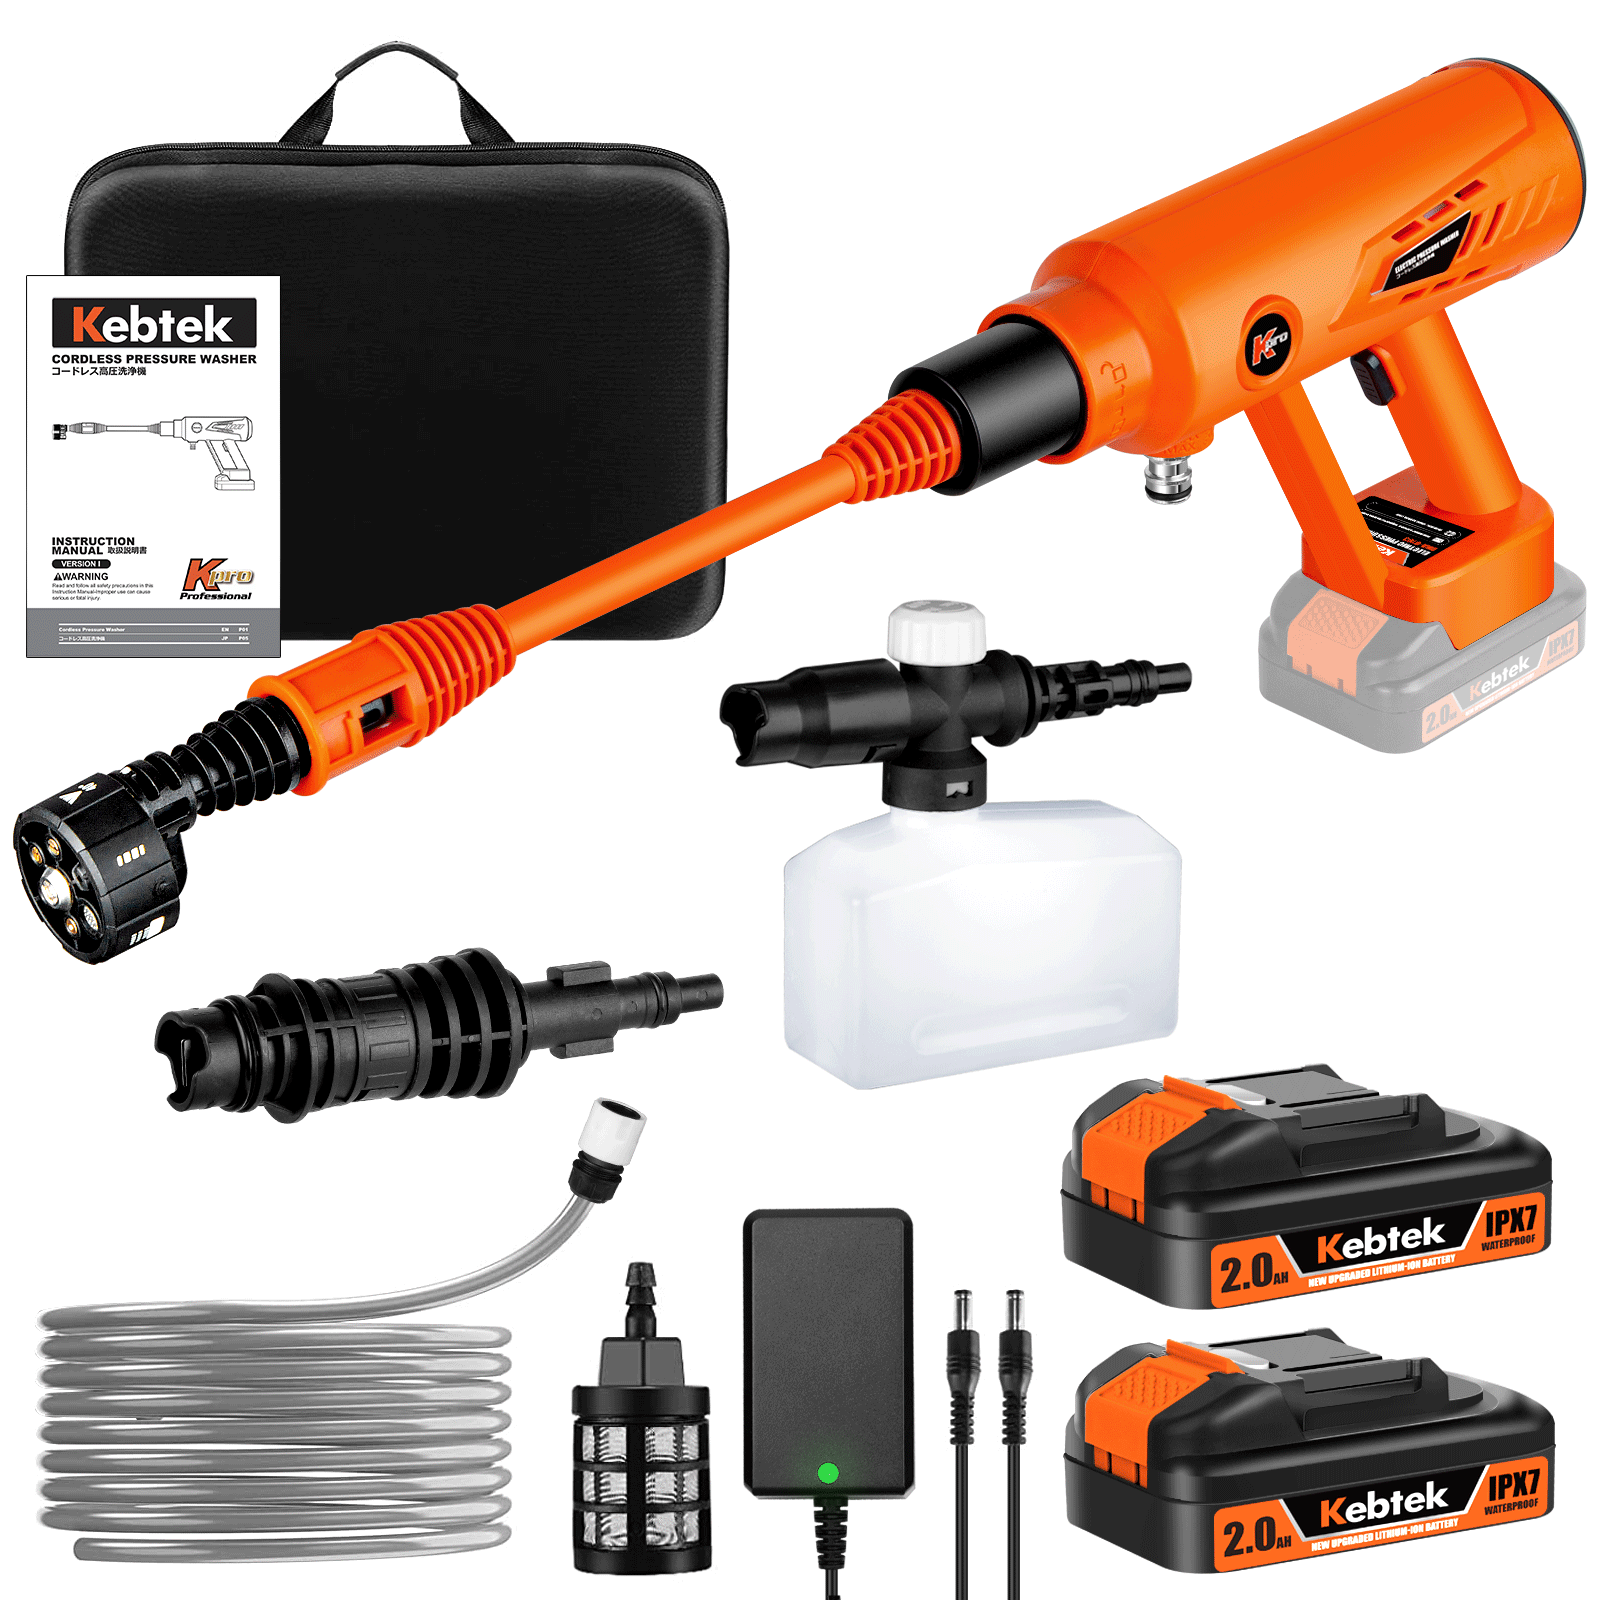 Cordless Pressure Washer Gun, 21V Portable Power Cleaner 900PSI with 6